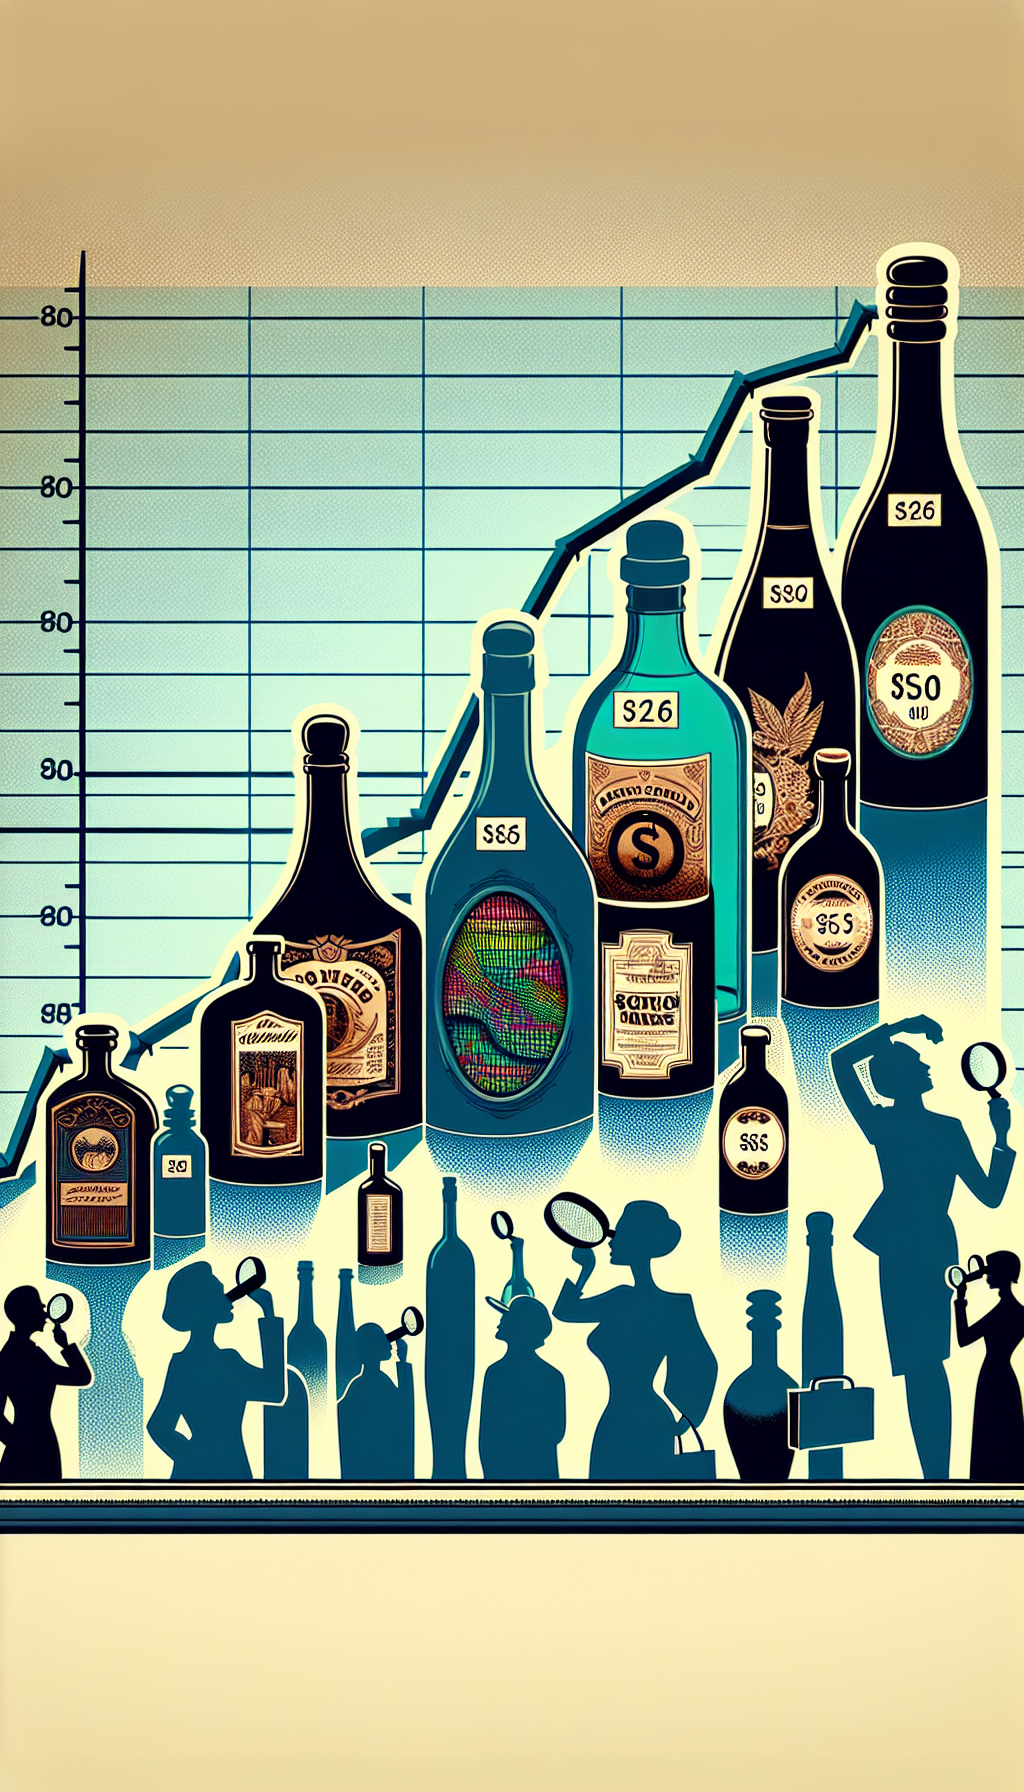 An illustration depicts a graph made of ascending vintage bottle silhouettes, each casting a shadow of its price tag. The highest bottle reflects current market peak with a vibrant, holographic label, while background collectors with magnifying glasses admire various styles—art deco, Victorian, contemporary—echoing diversifying trends and the value of aged collectibles within an ever-changing market.